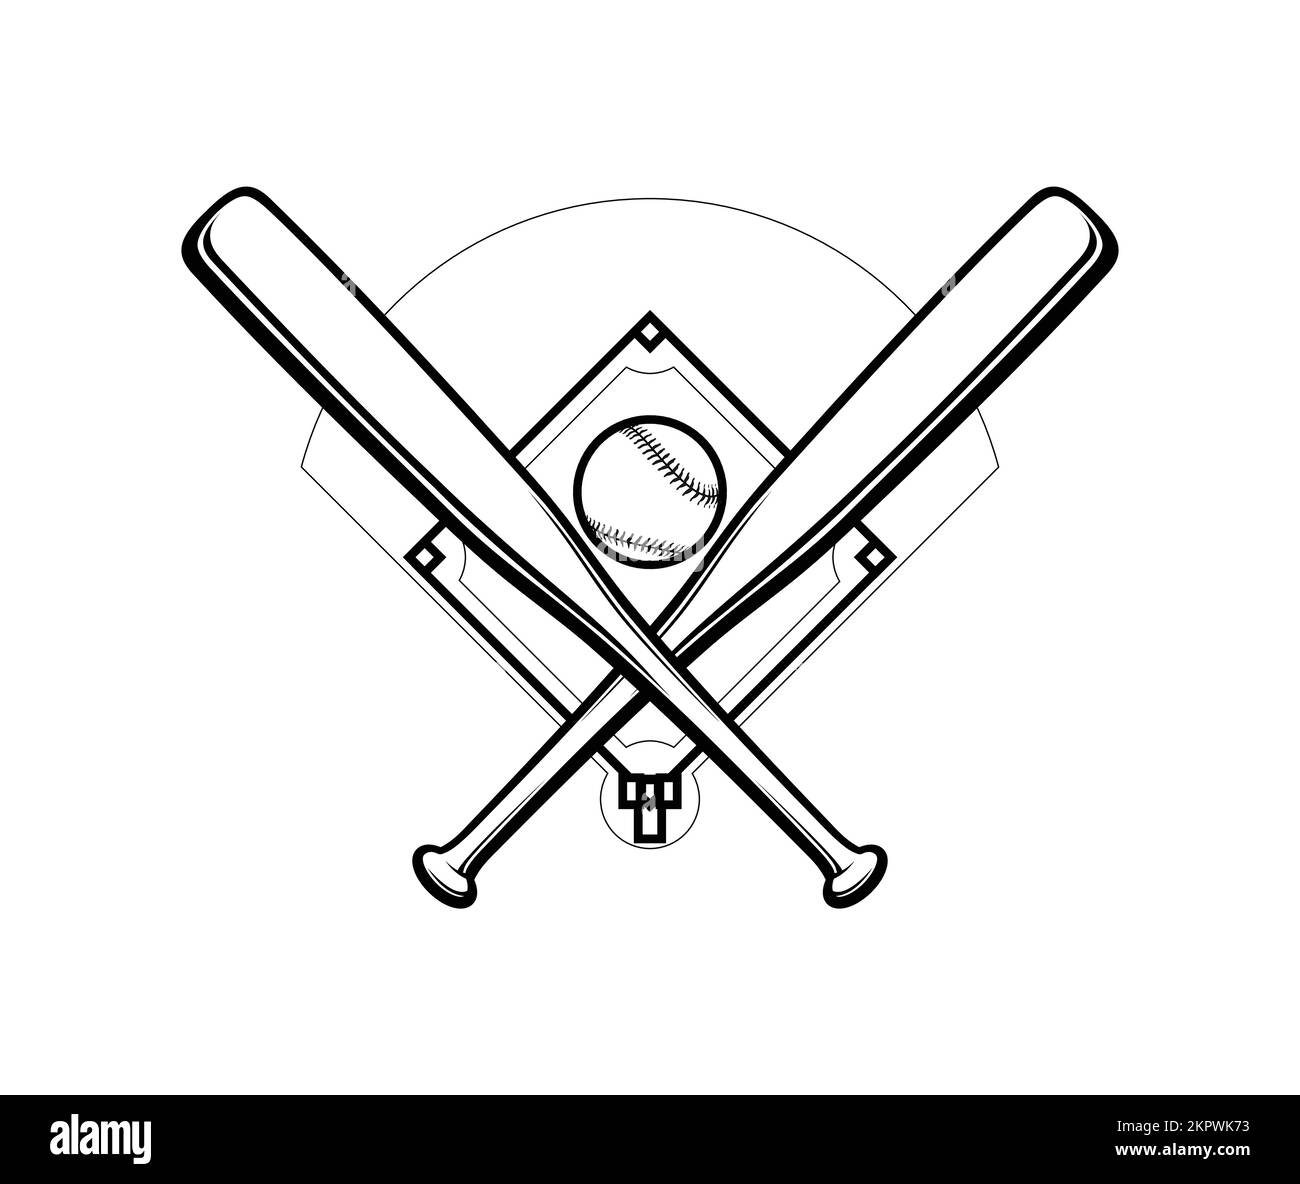 simple classic wooden baseball bat ball and diamond field lineart vector illustration isolated on white background Stock Vector